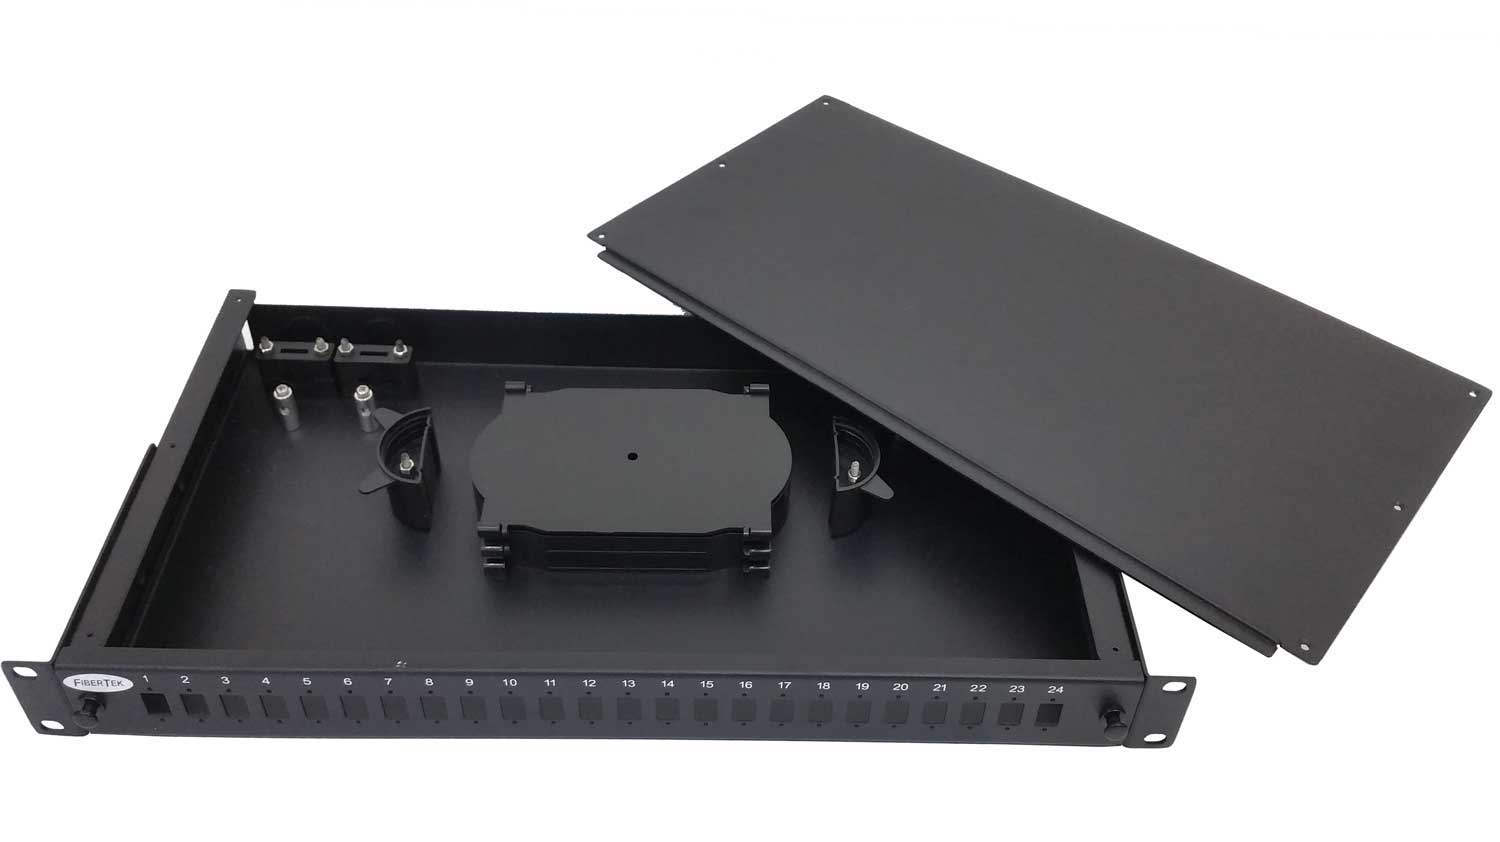 FPP124 Series Rack Mount Patch Panel for SC simplex adapter with top cover removed